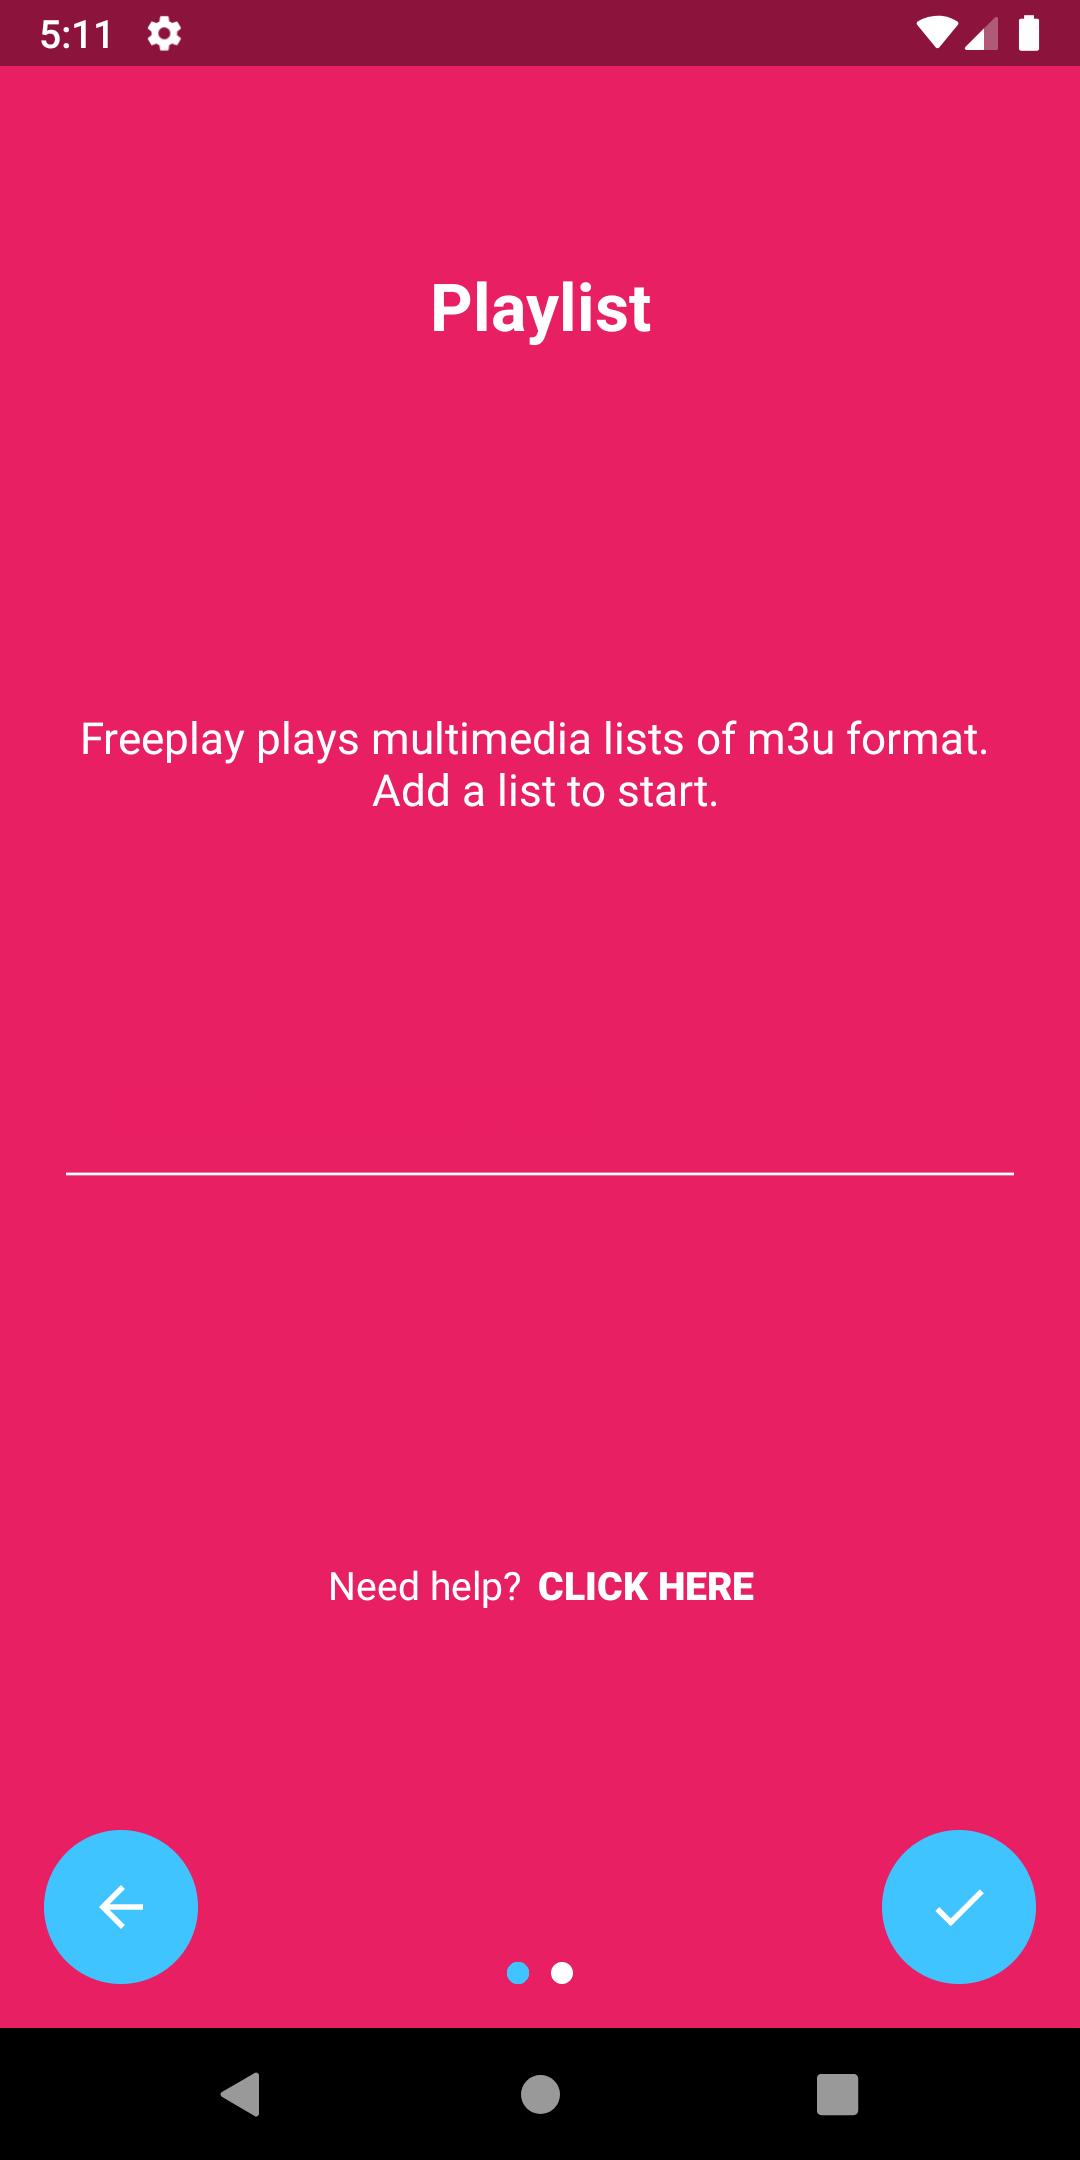 FreePlay for Android - APK Download